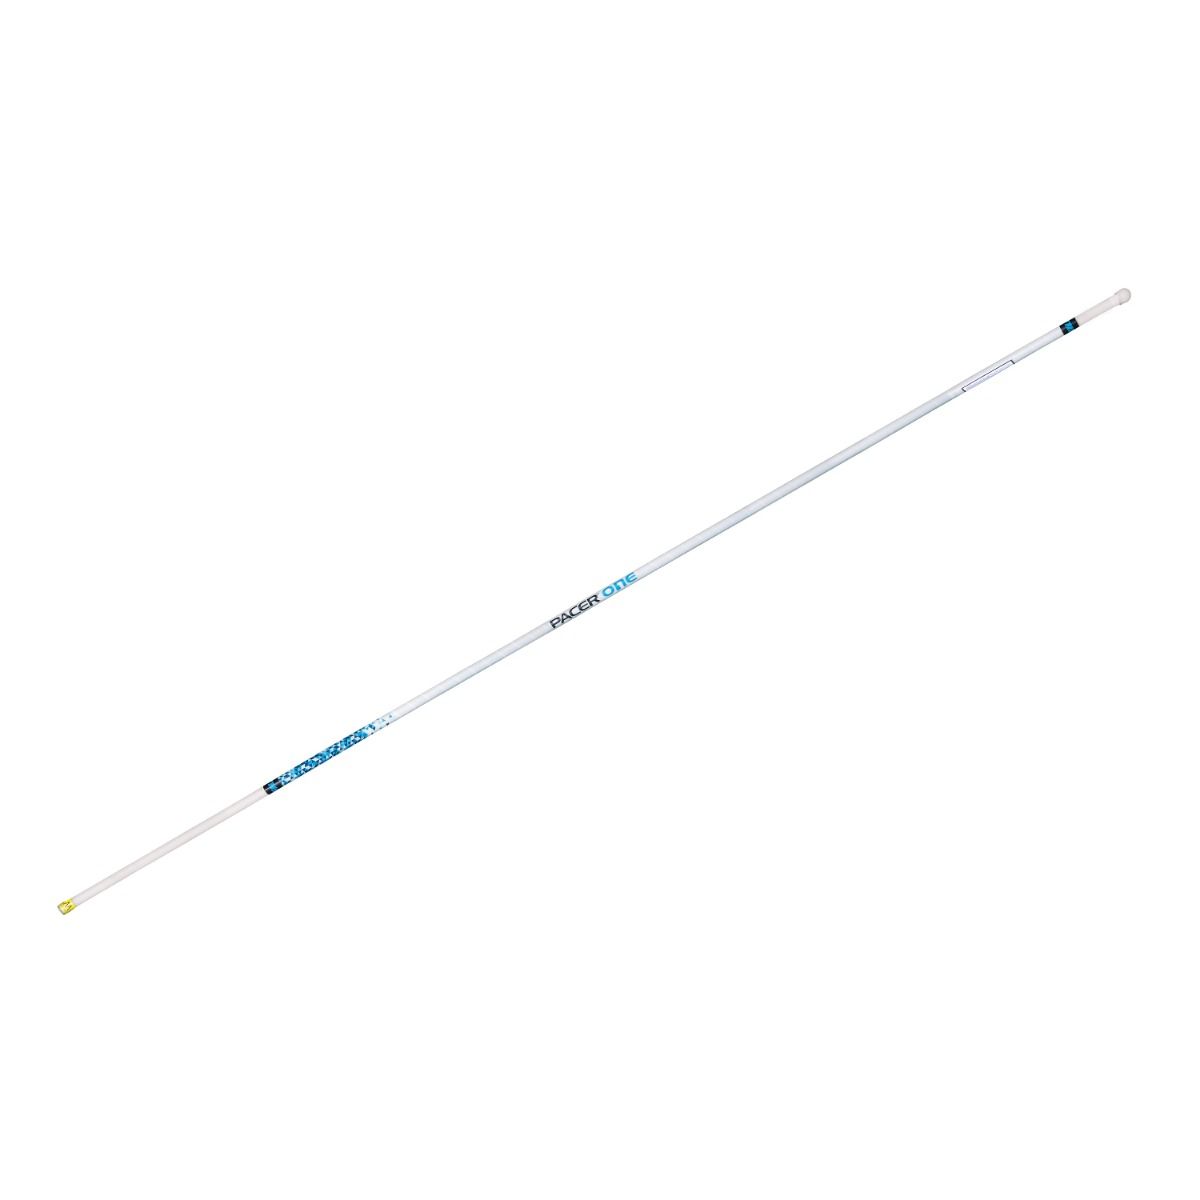 Gill 9' Pacer One Vaulting Pole